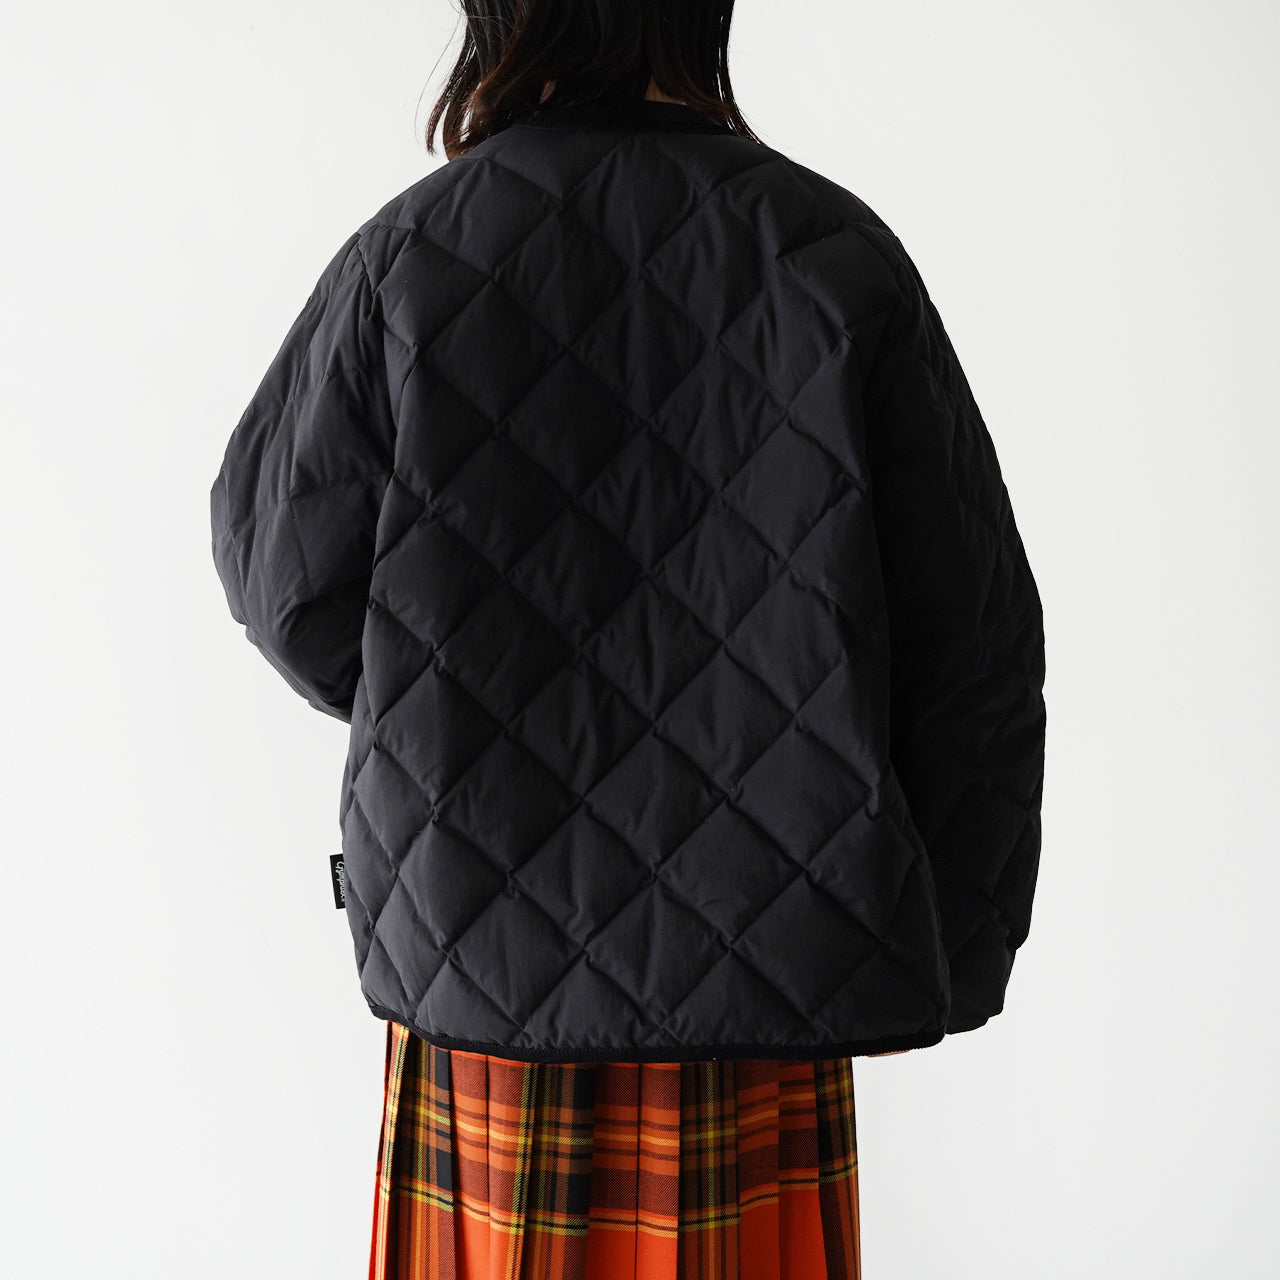 Gymphlex ジムフレックス キルト ダウン パフスリーブ ジャケット QUILT DOWN PUFF SLEEVE JACKET GY-A0432NYM【送料無料】